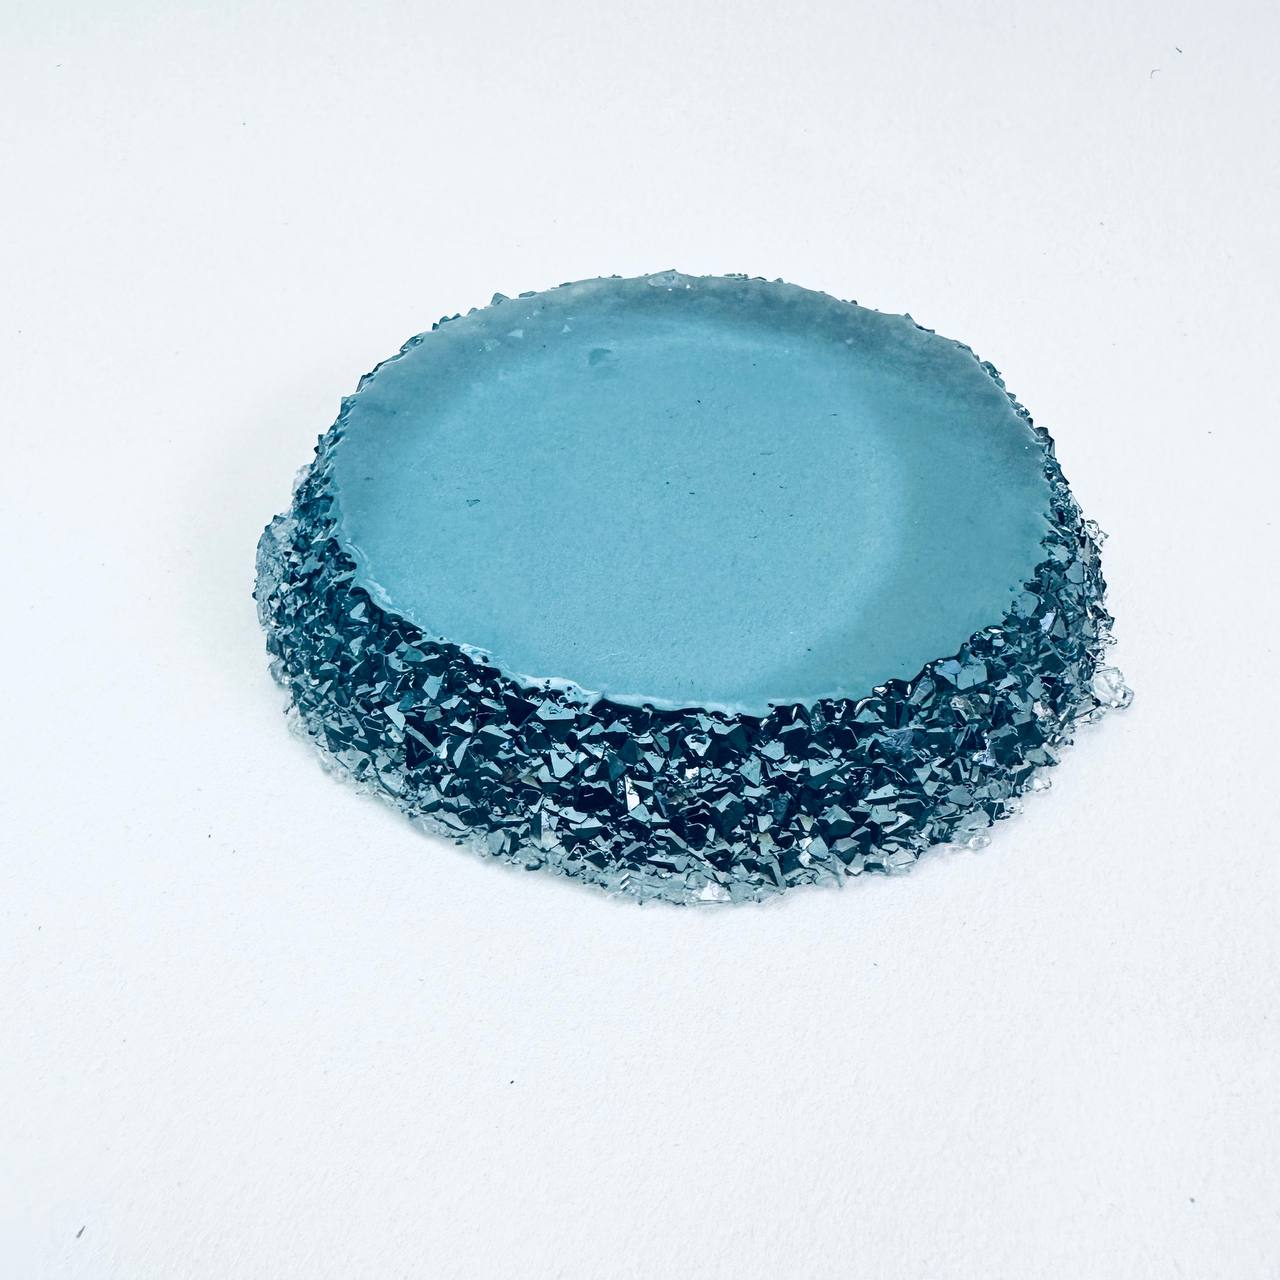 New Sparkle Coaster with Crystal Edges Silicone Mold